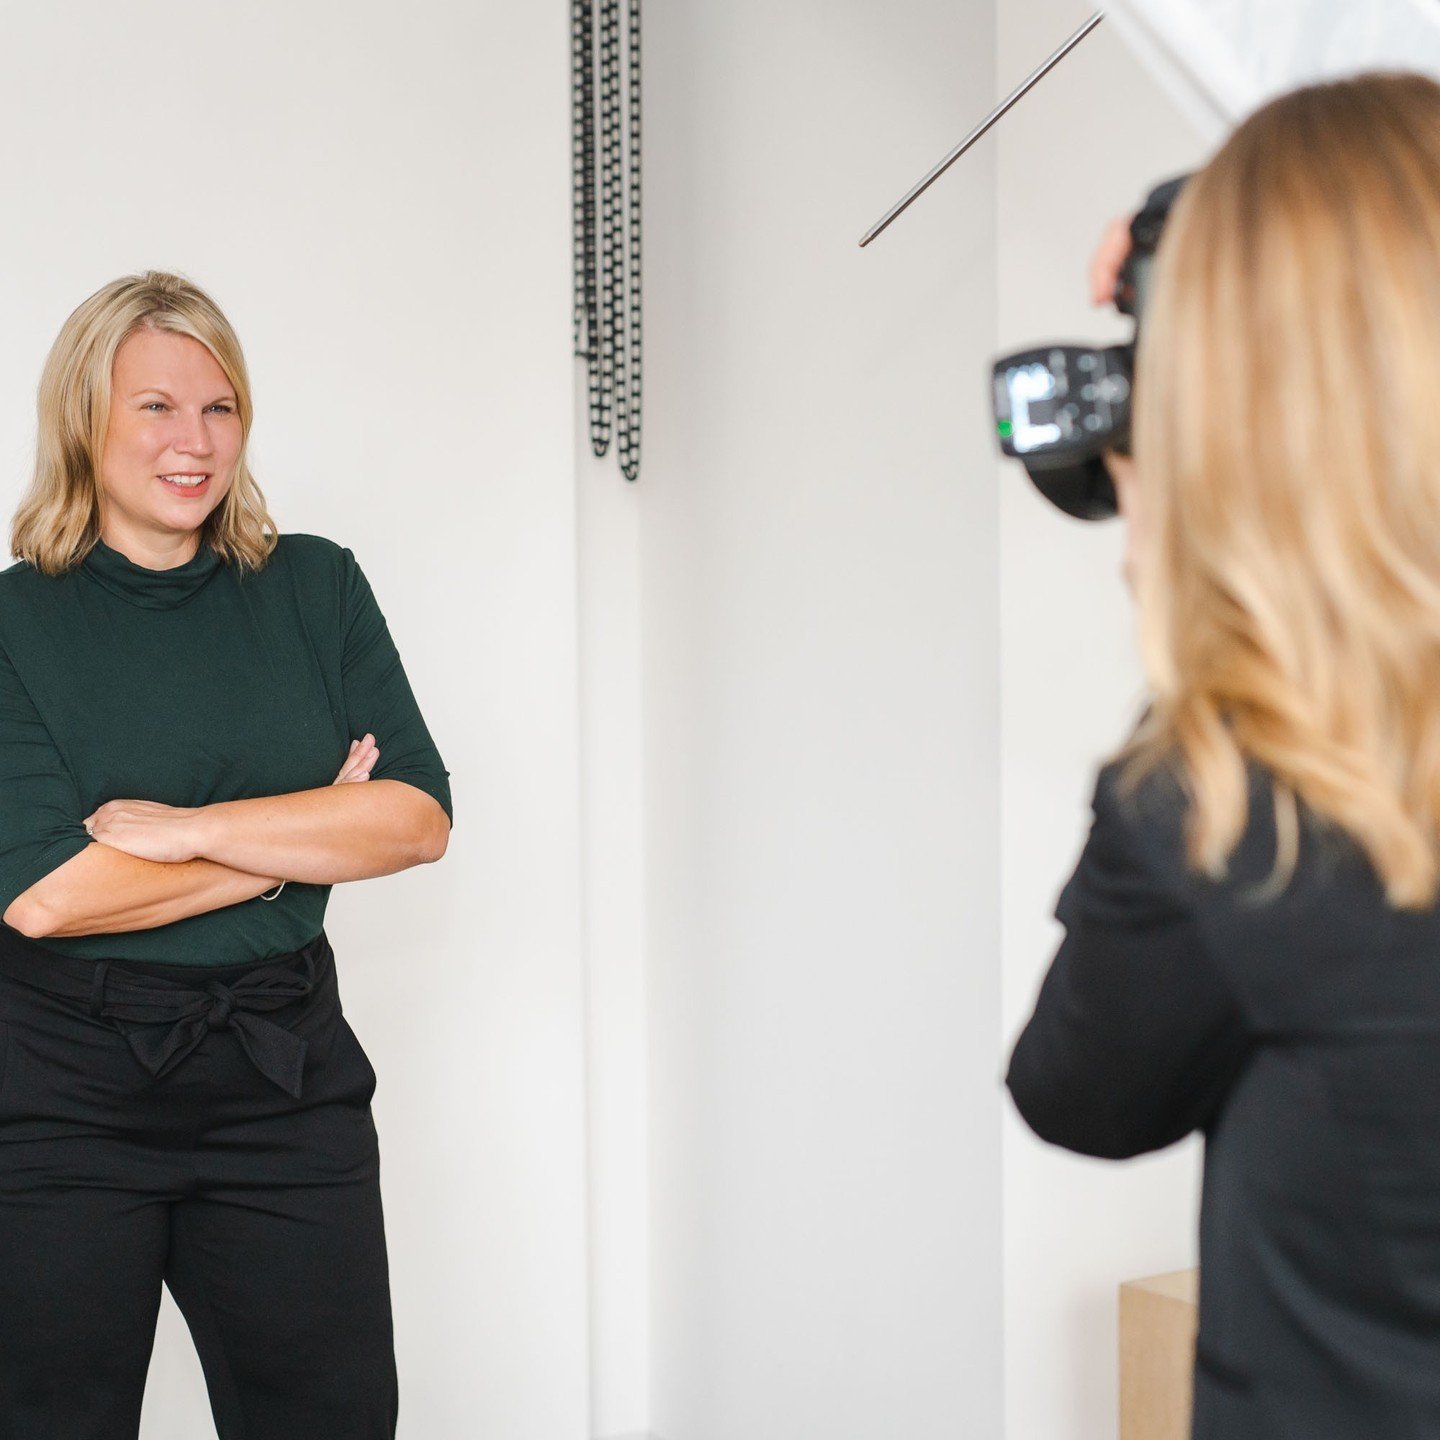 📸 PREPARING FOR YOUR HEADSHOT SESSION 📸⁠
⁠
Whether you opt for a professional photographer or DIY, here are some tips for a successful headshot session:⁠
⁠
👗 Wardrobe: Choose clothing that reflects your industry and personal brand. Avoid distracti